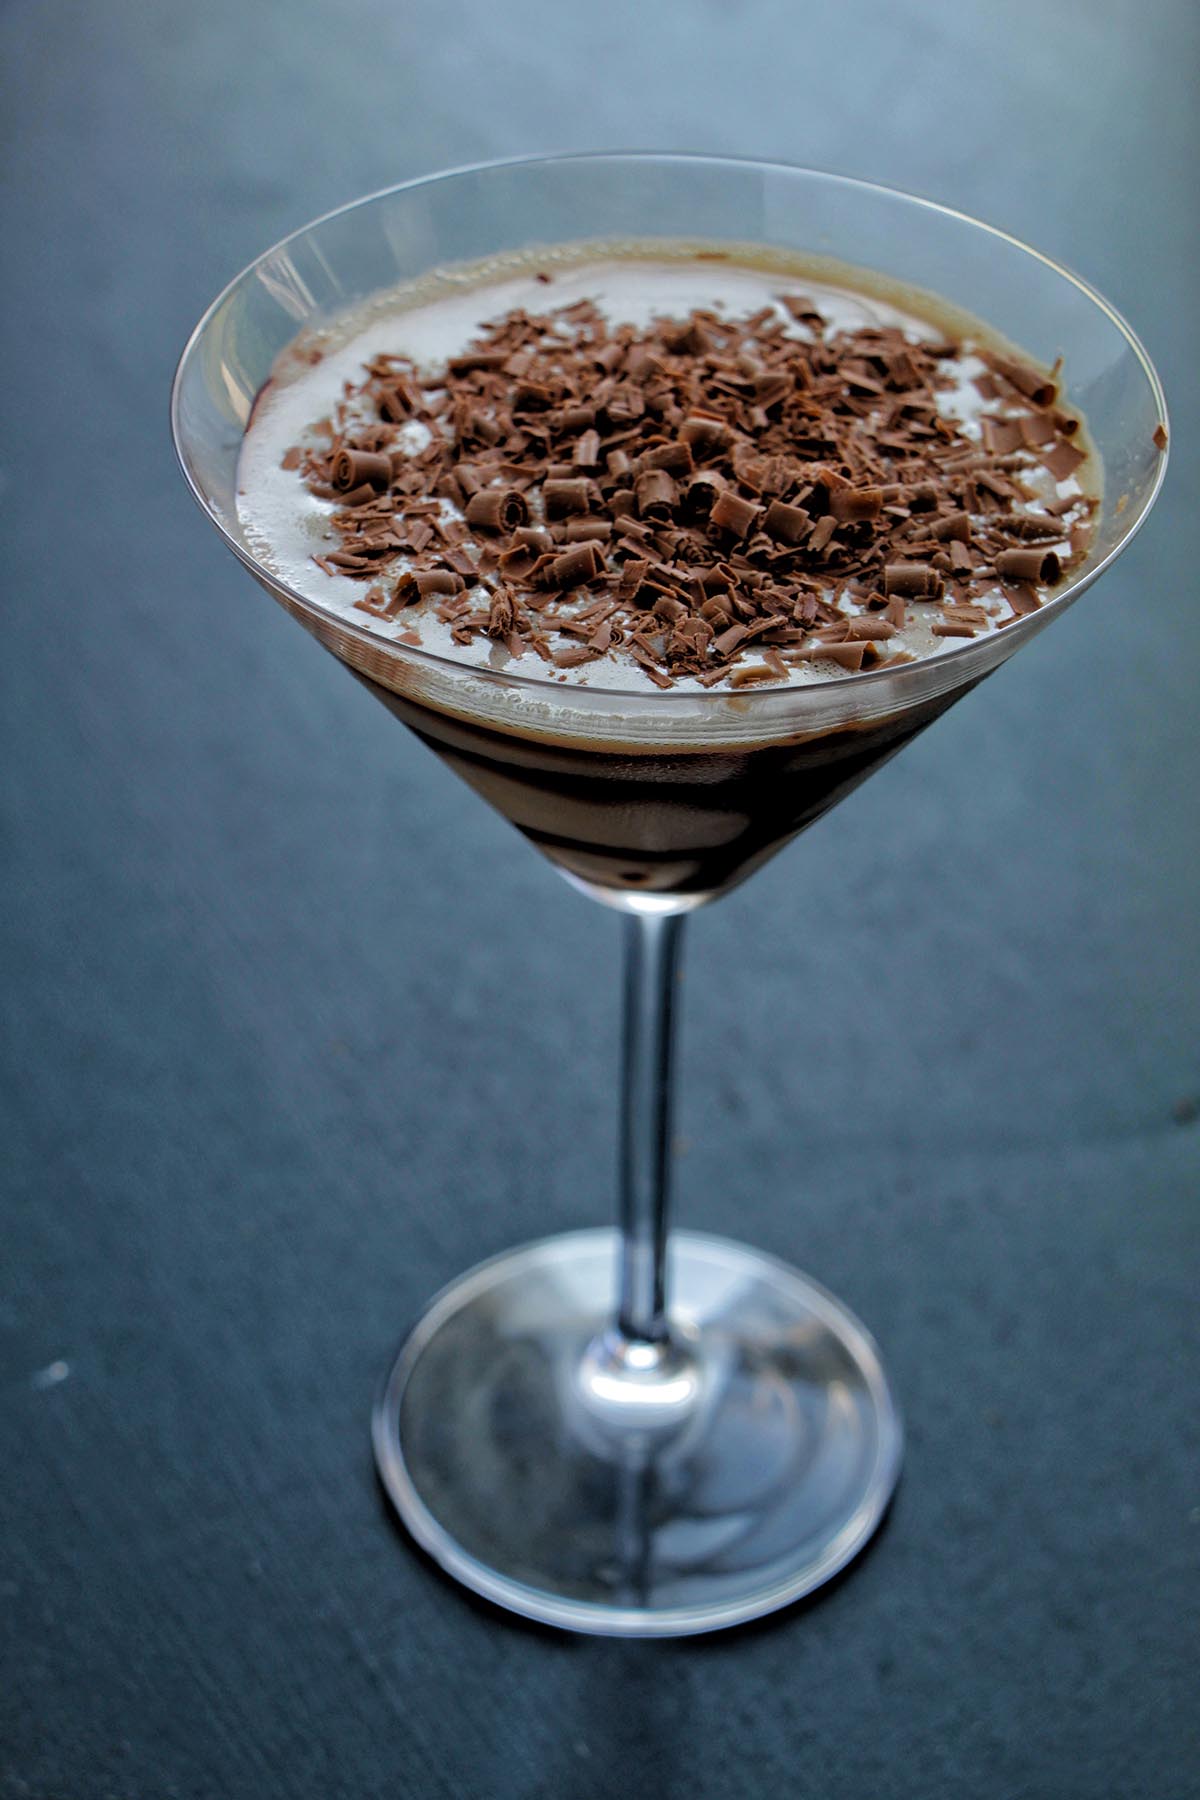 chocolate martini topped with chocolate shavings.